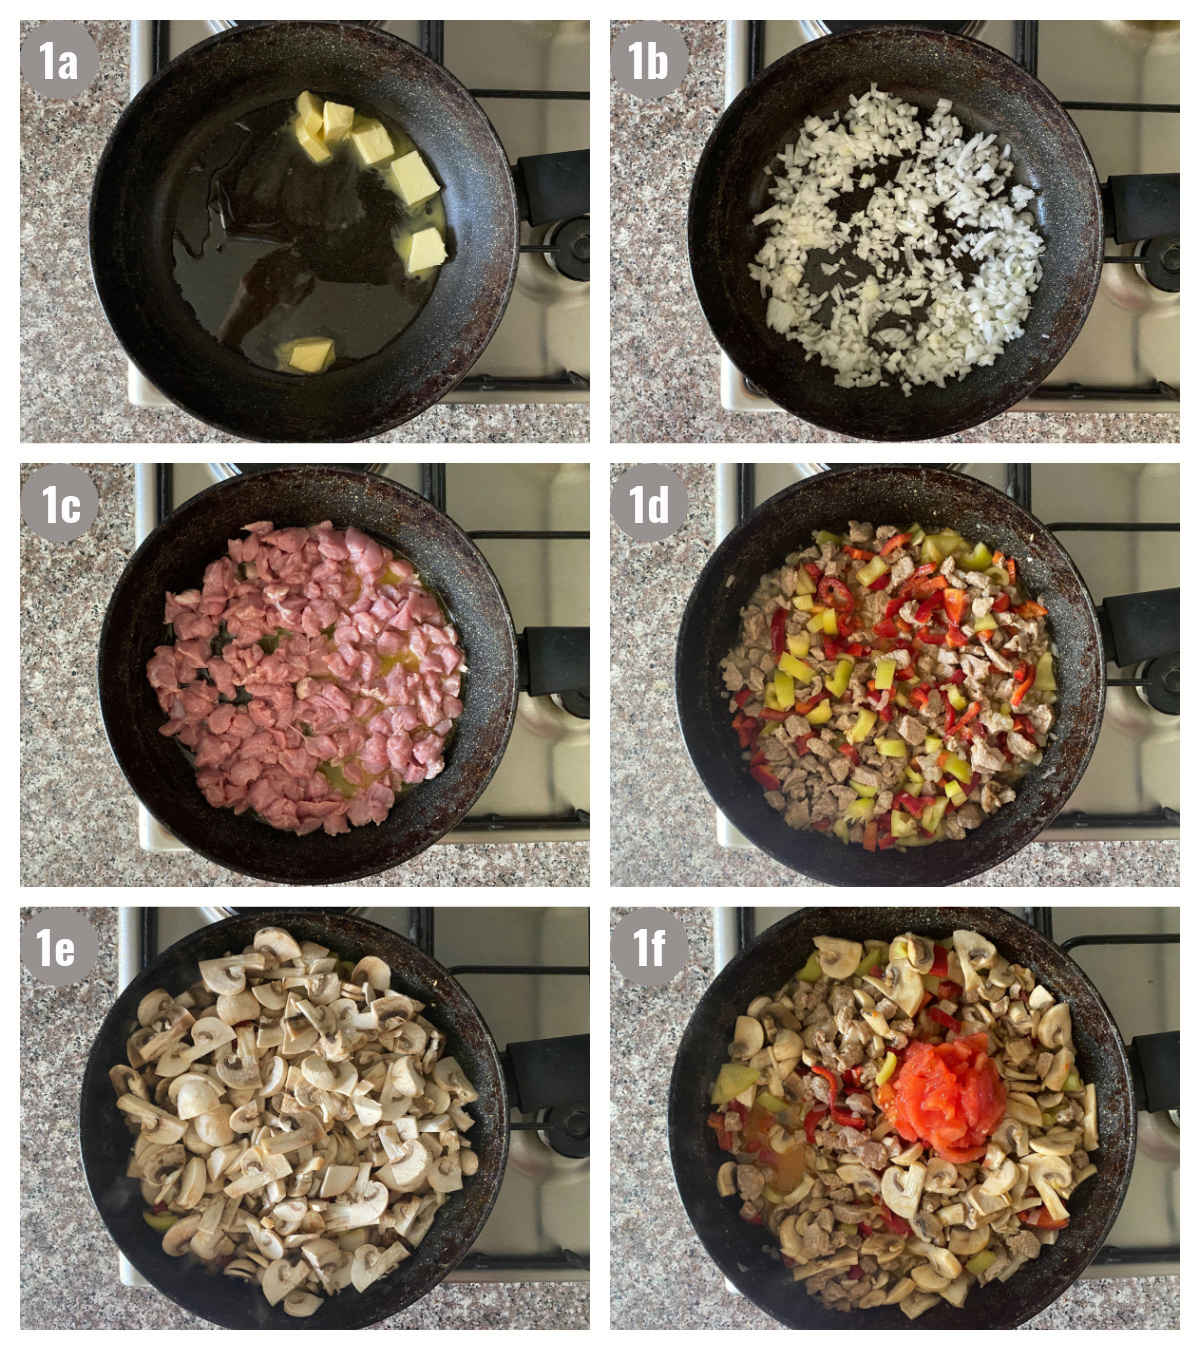 Six photographs, two by two, of a black pan with different ingredients inside (meat, onion, butter, oil, mushrooms, etc.).